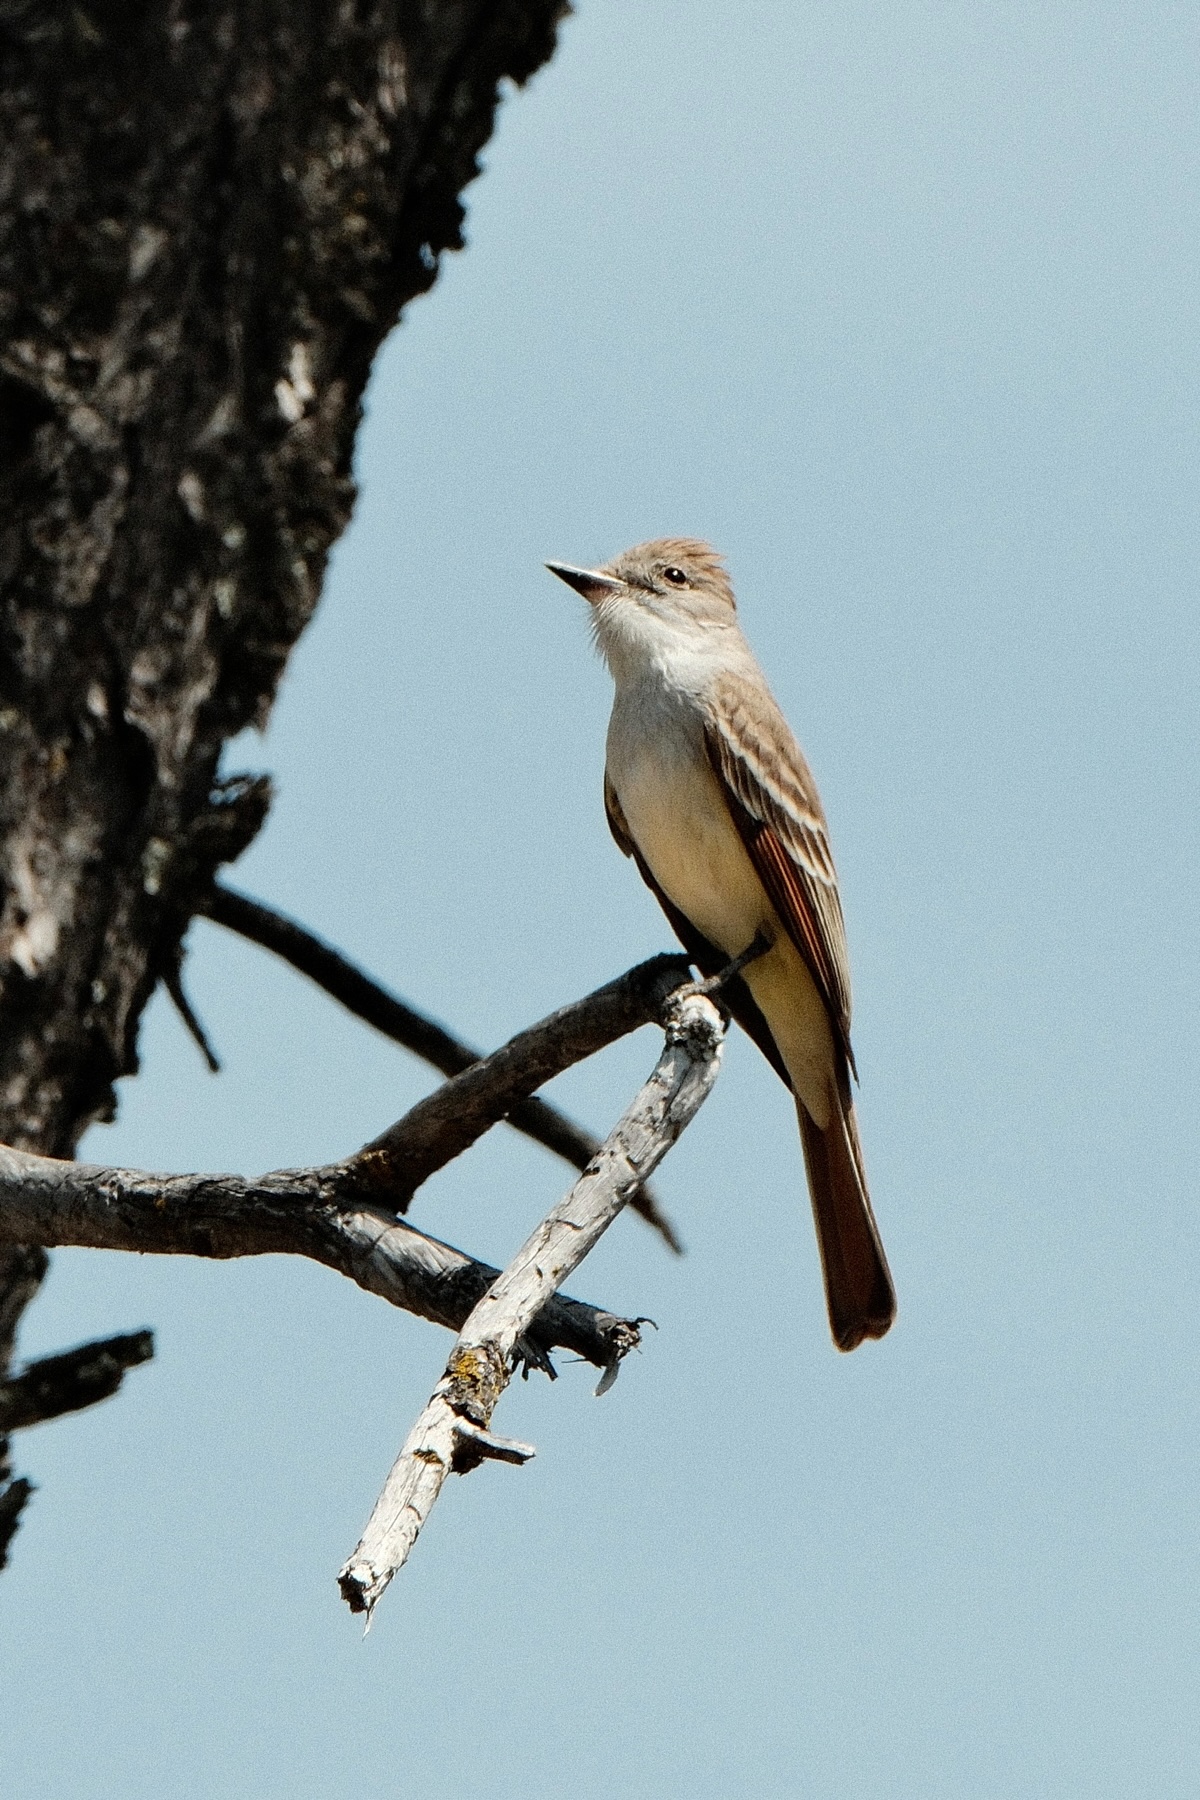 Ash-throated flycatcher looking toward the horizon! It is perched on a bare branch against a blue sky. It’s a slender bird with a gray chest and belly and a dark gray head. Its wings are brown with white bars that curve down. Its brown tail is very narrow. 